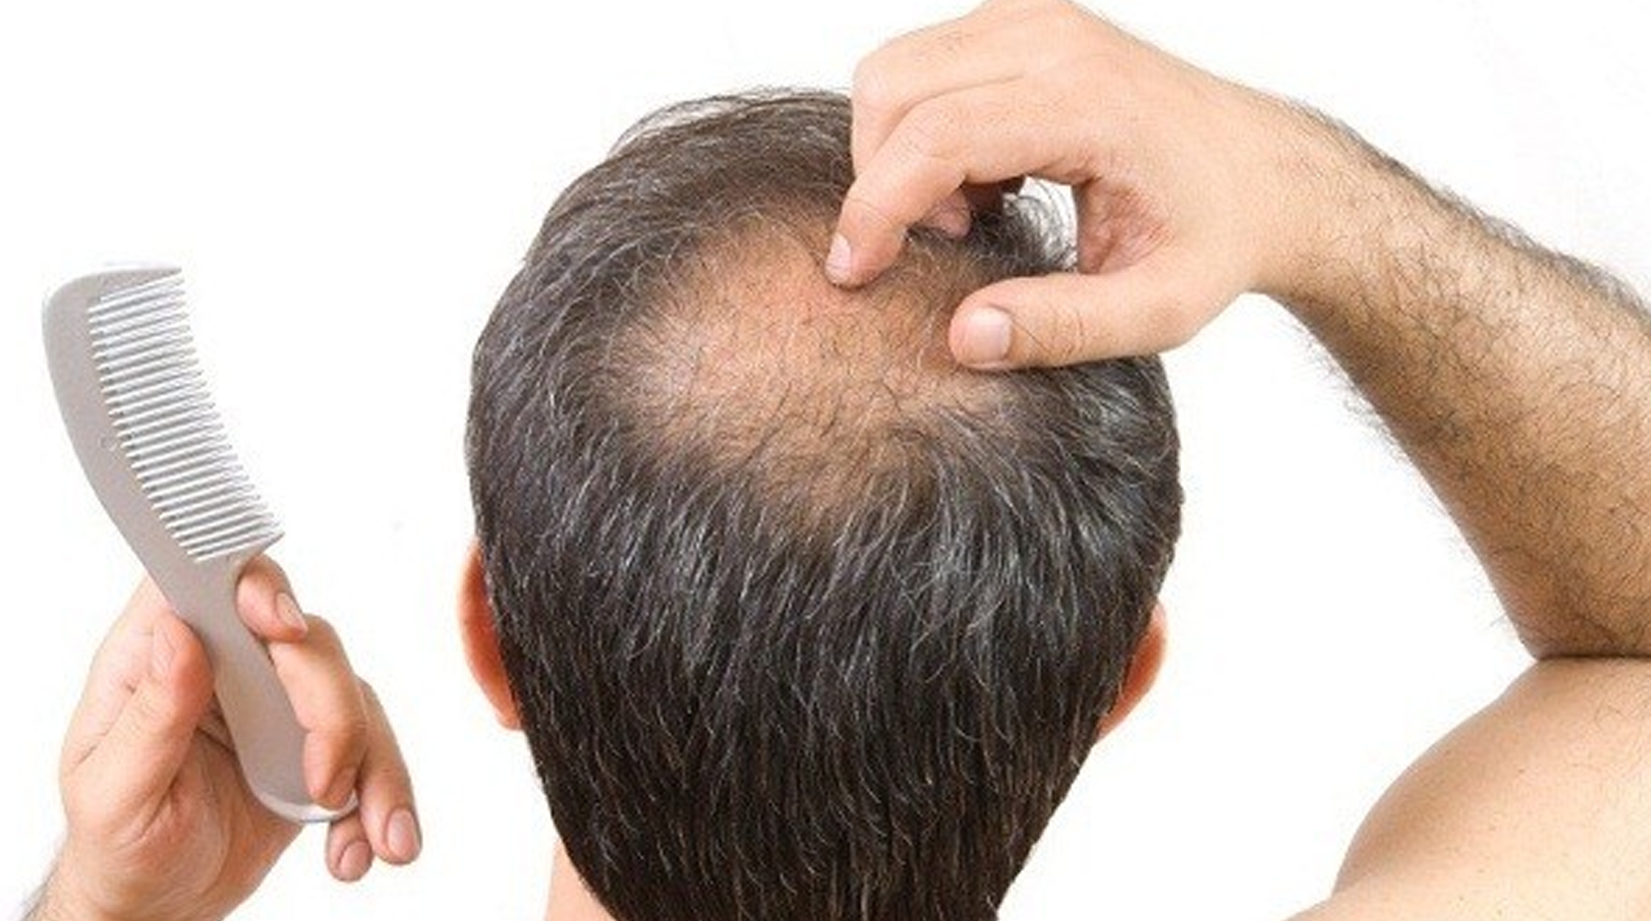 Alopecia areata 3 products for bald patches on your head  Hair Growth  Specialist  The Hair Growth Specialist